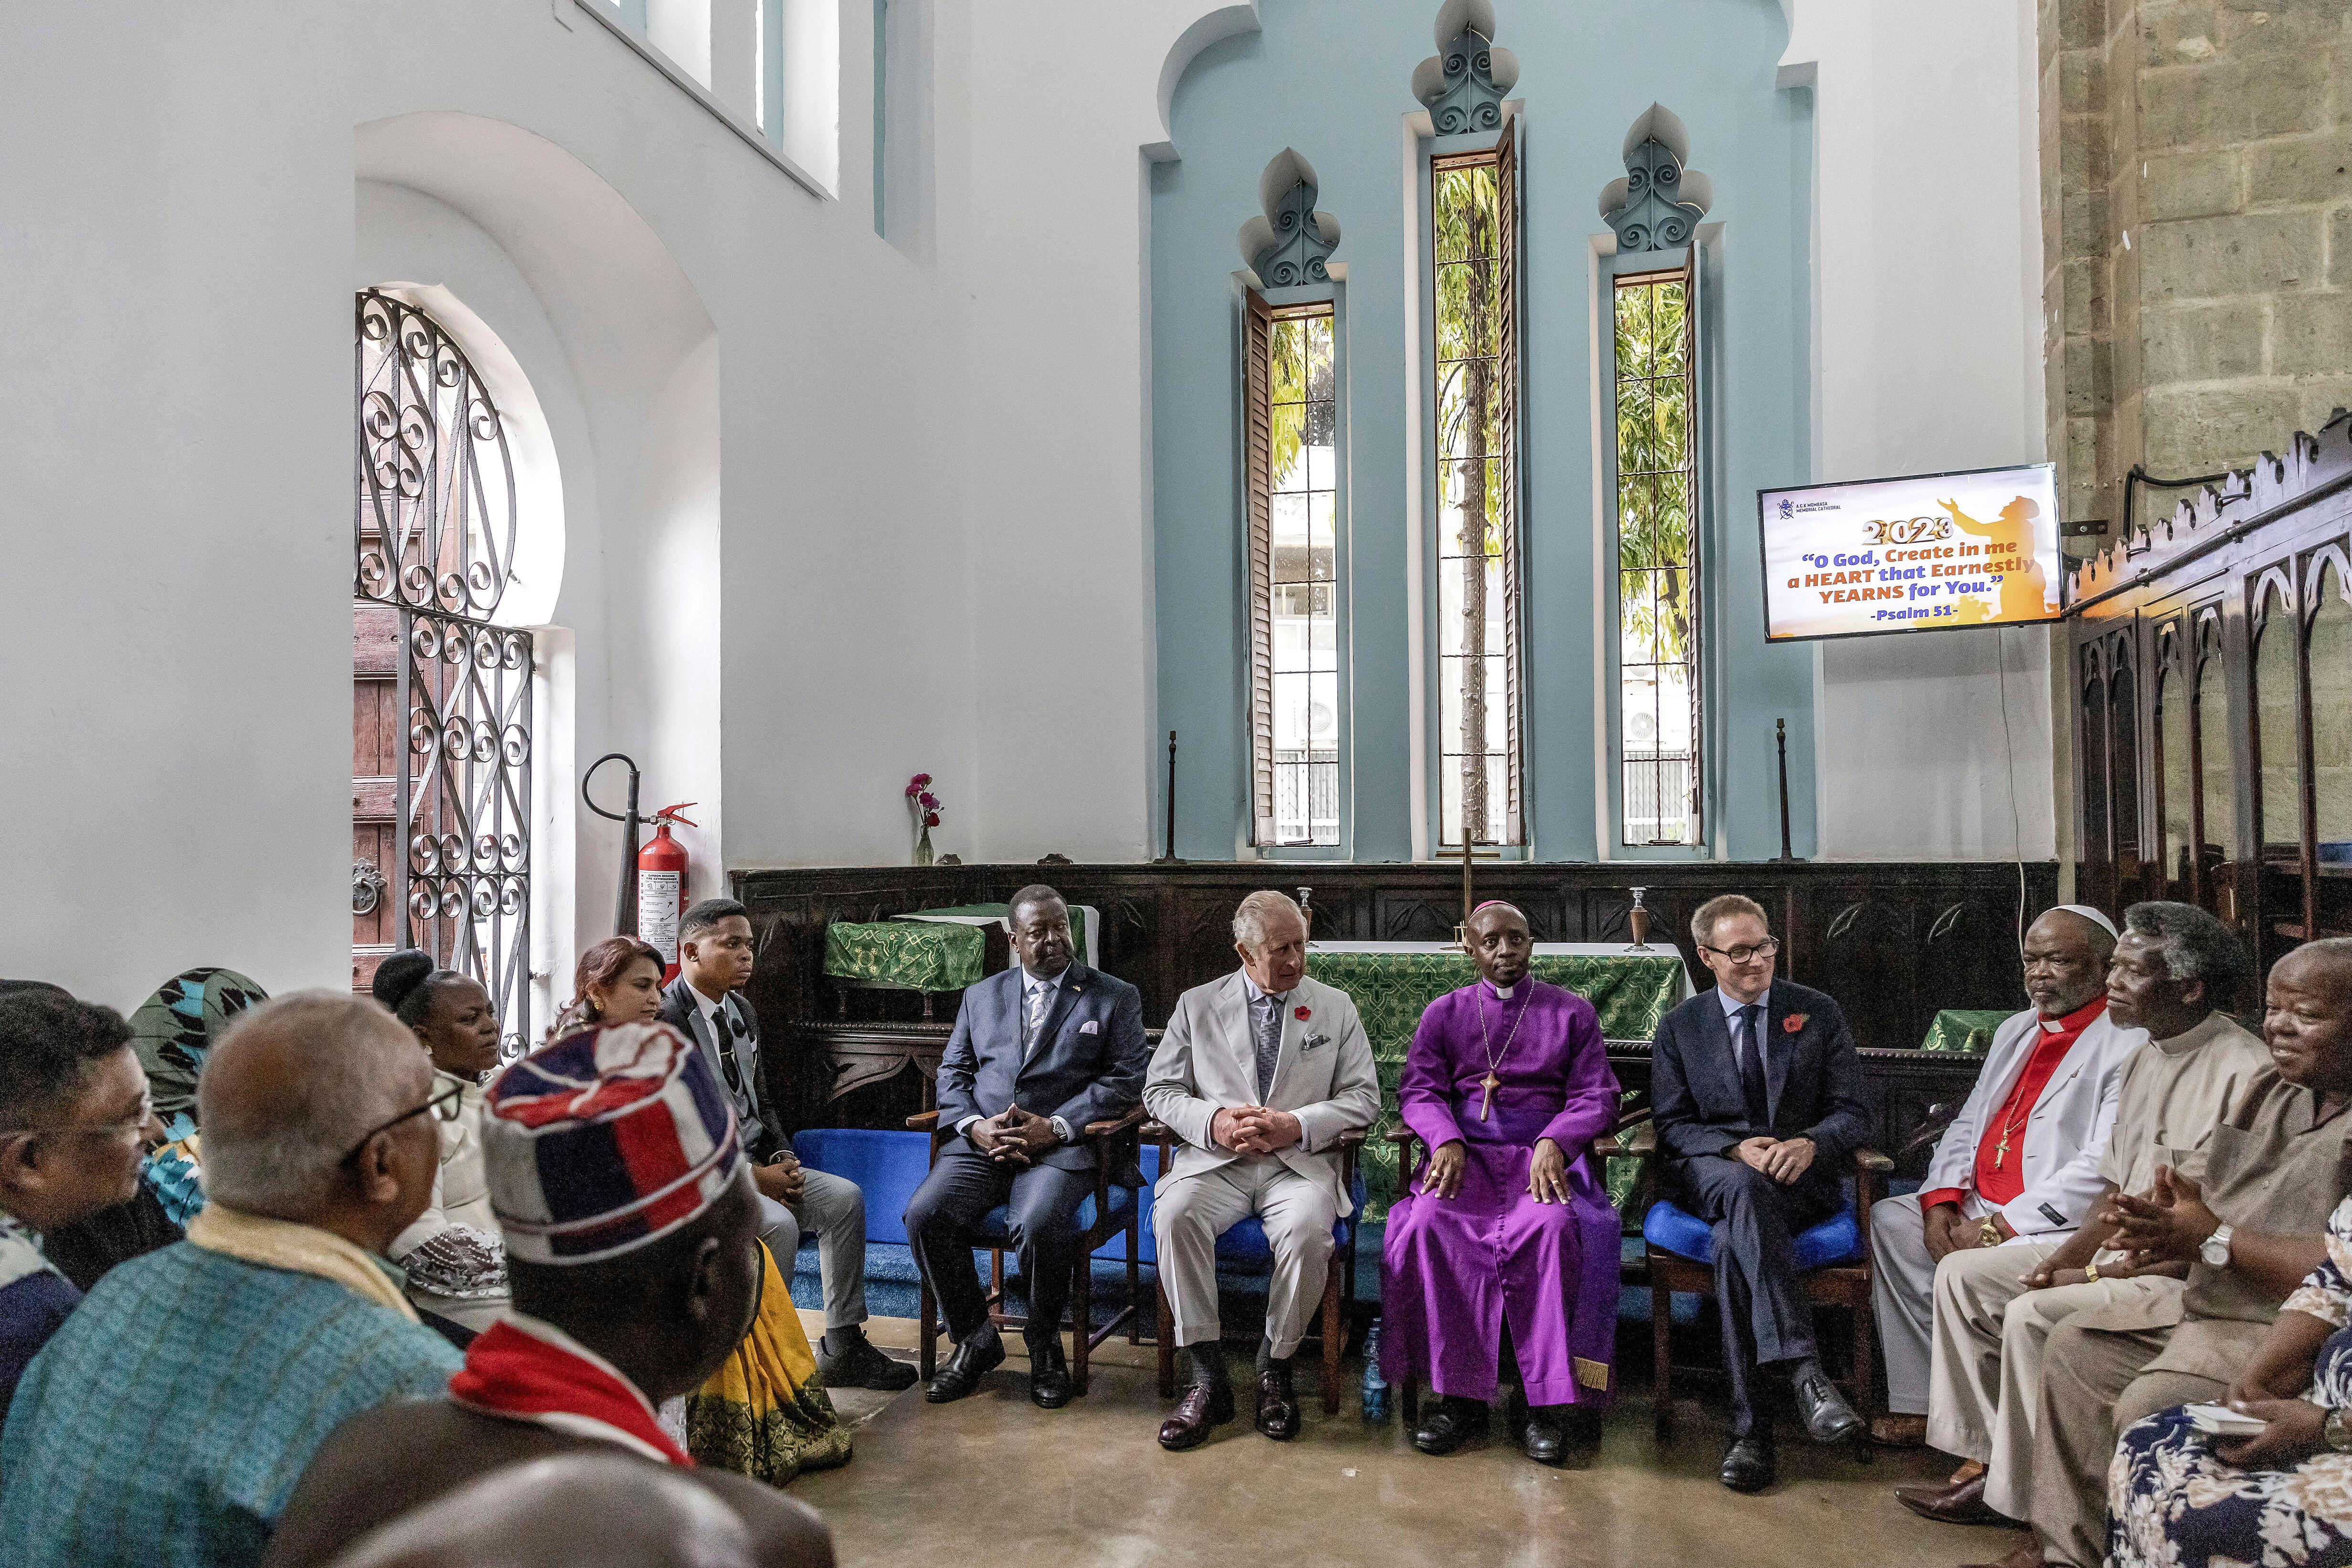 Royal visit showed space for interfaith dialogue, says Kenyan priest